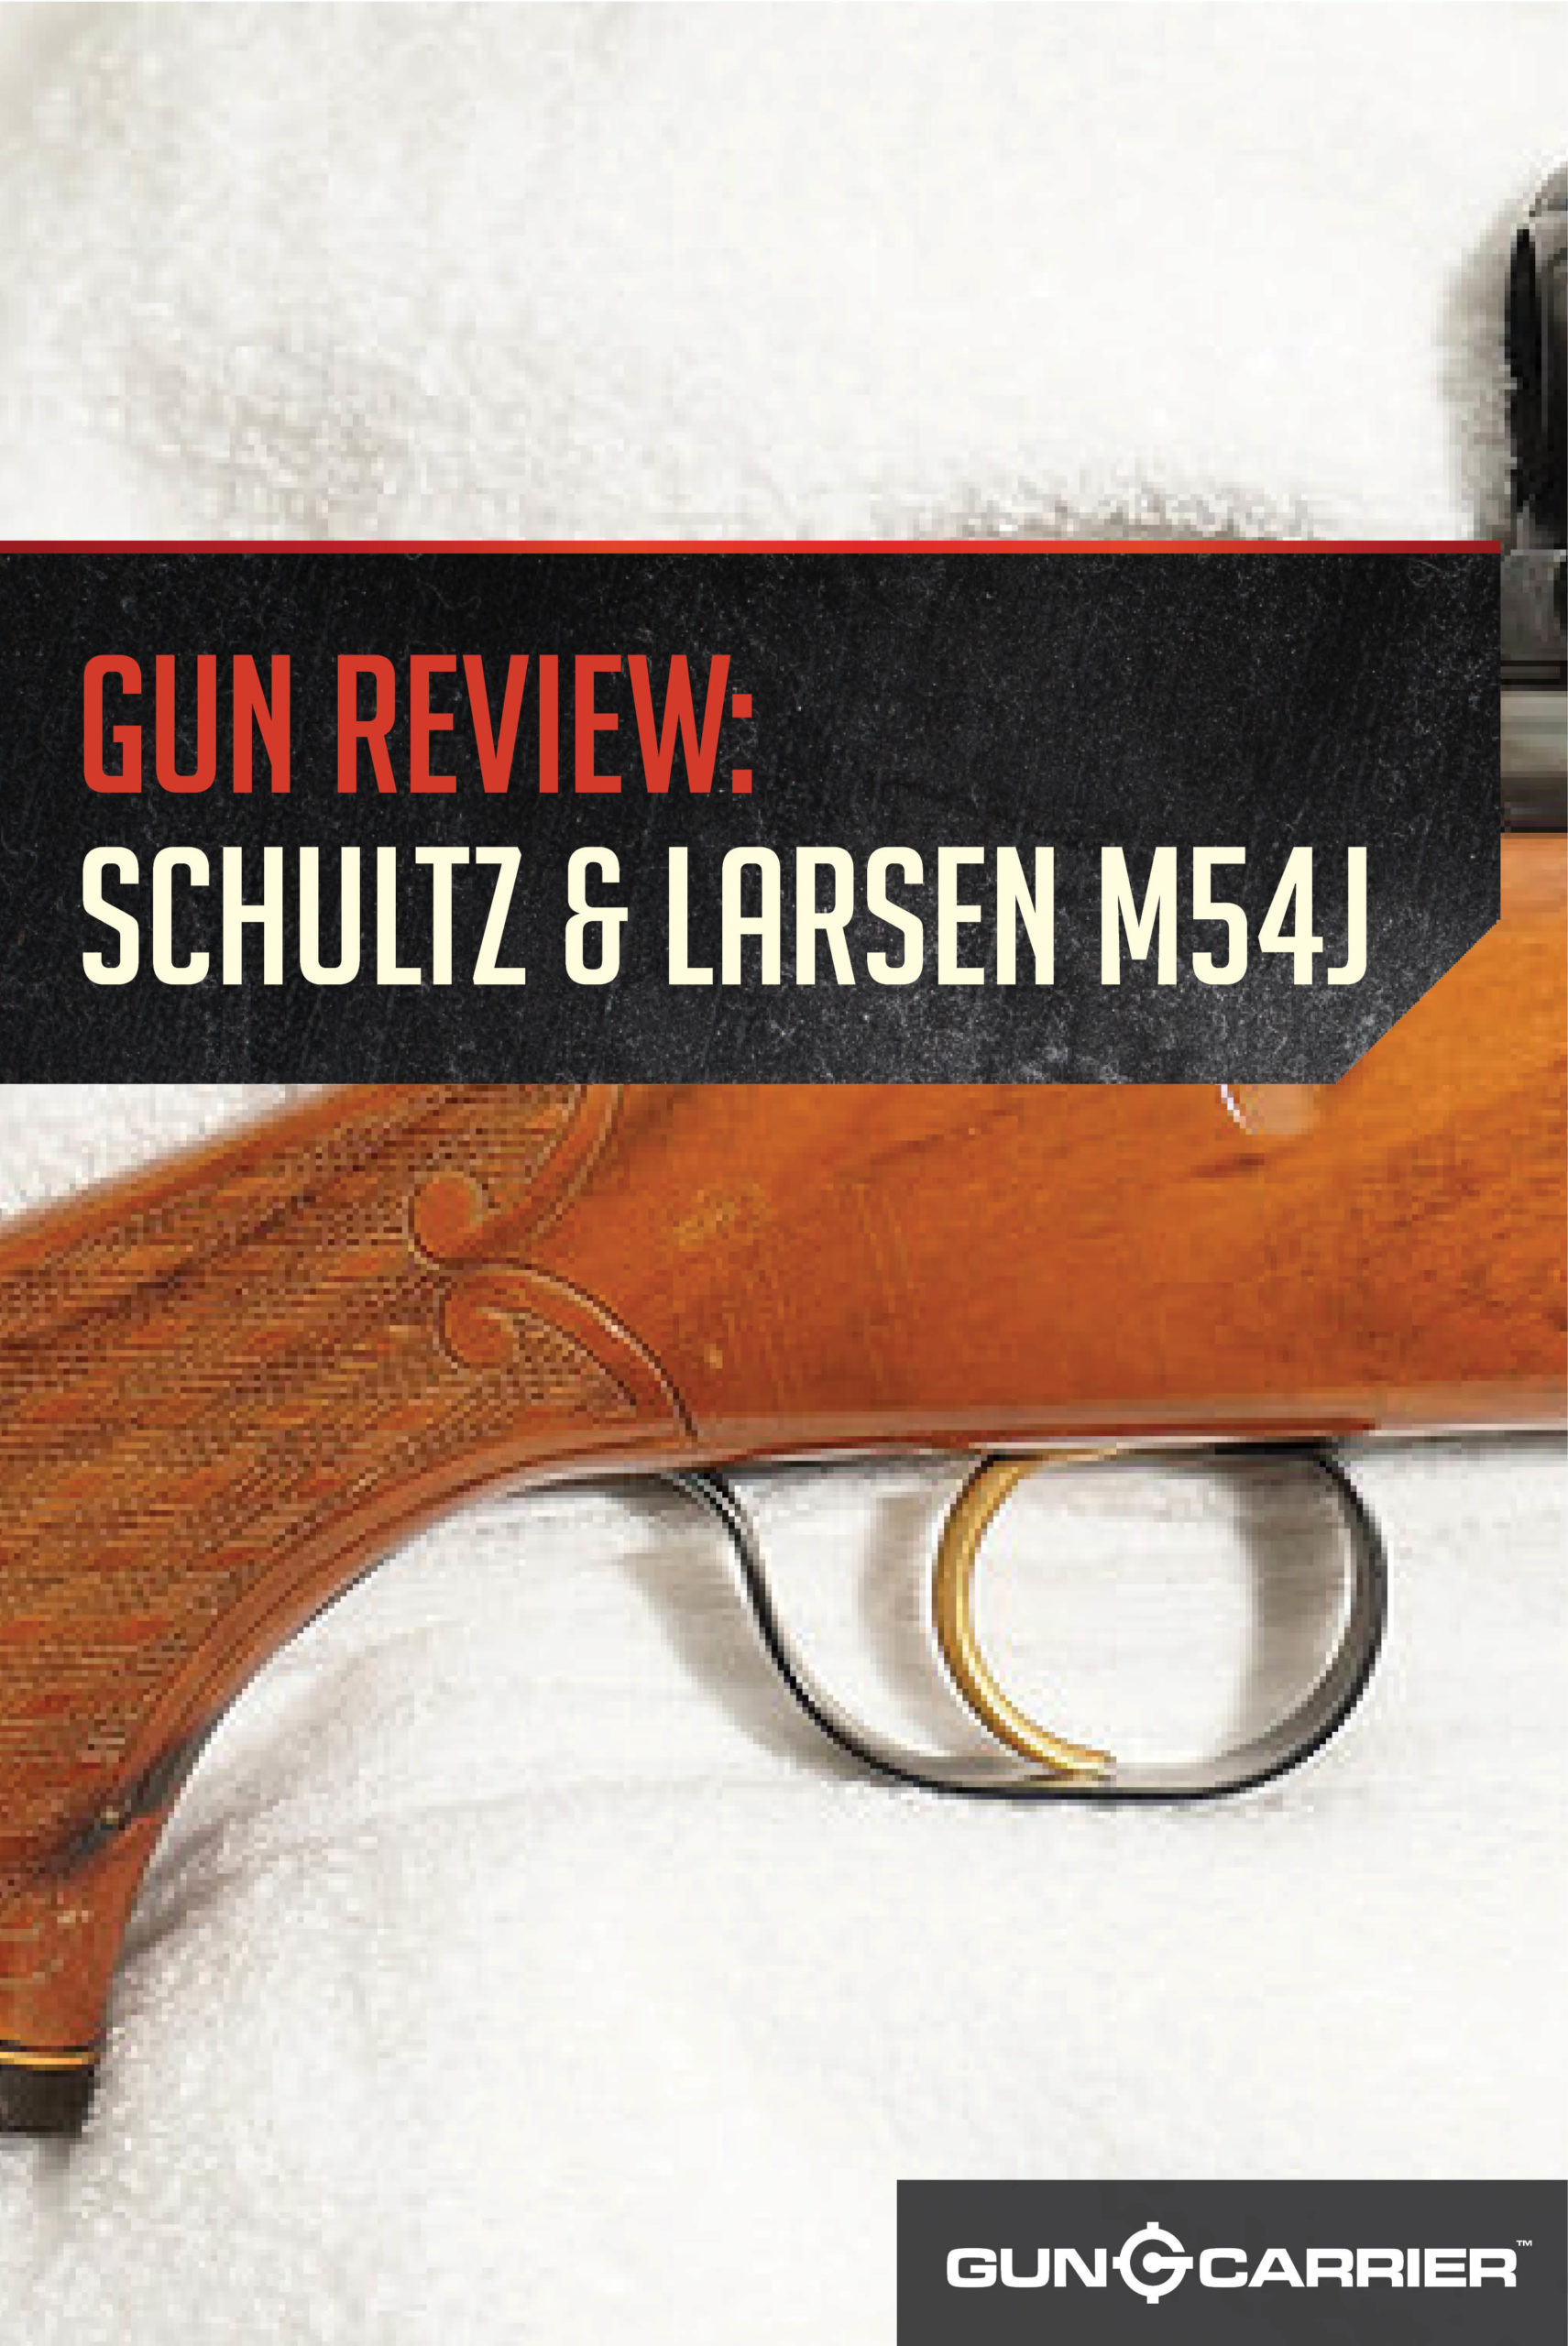 Schultz & Larsen M54J Review by Gun Carrier at https://guncarriernews.wpengine.com/schultz-larsen-m54j-review/